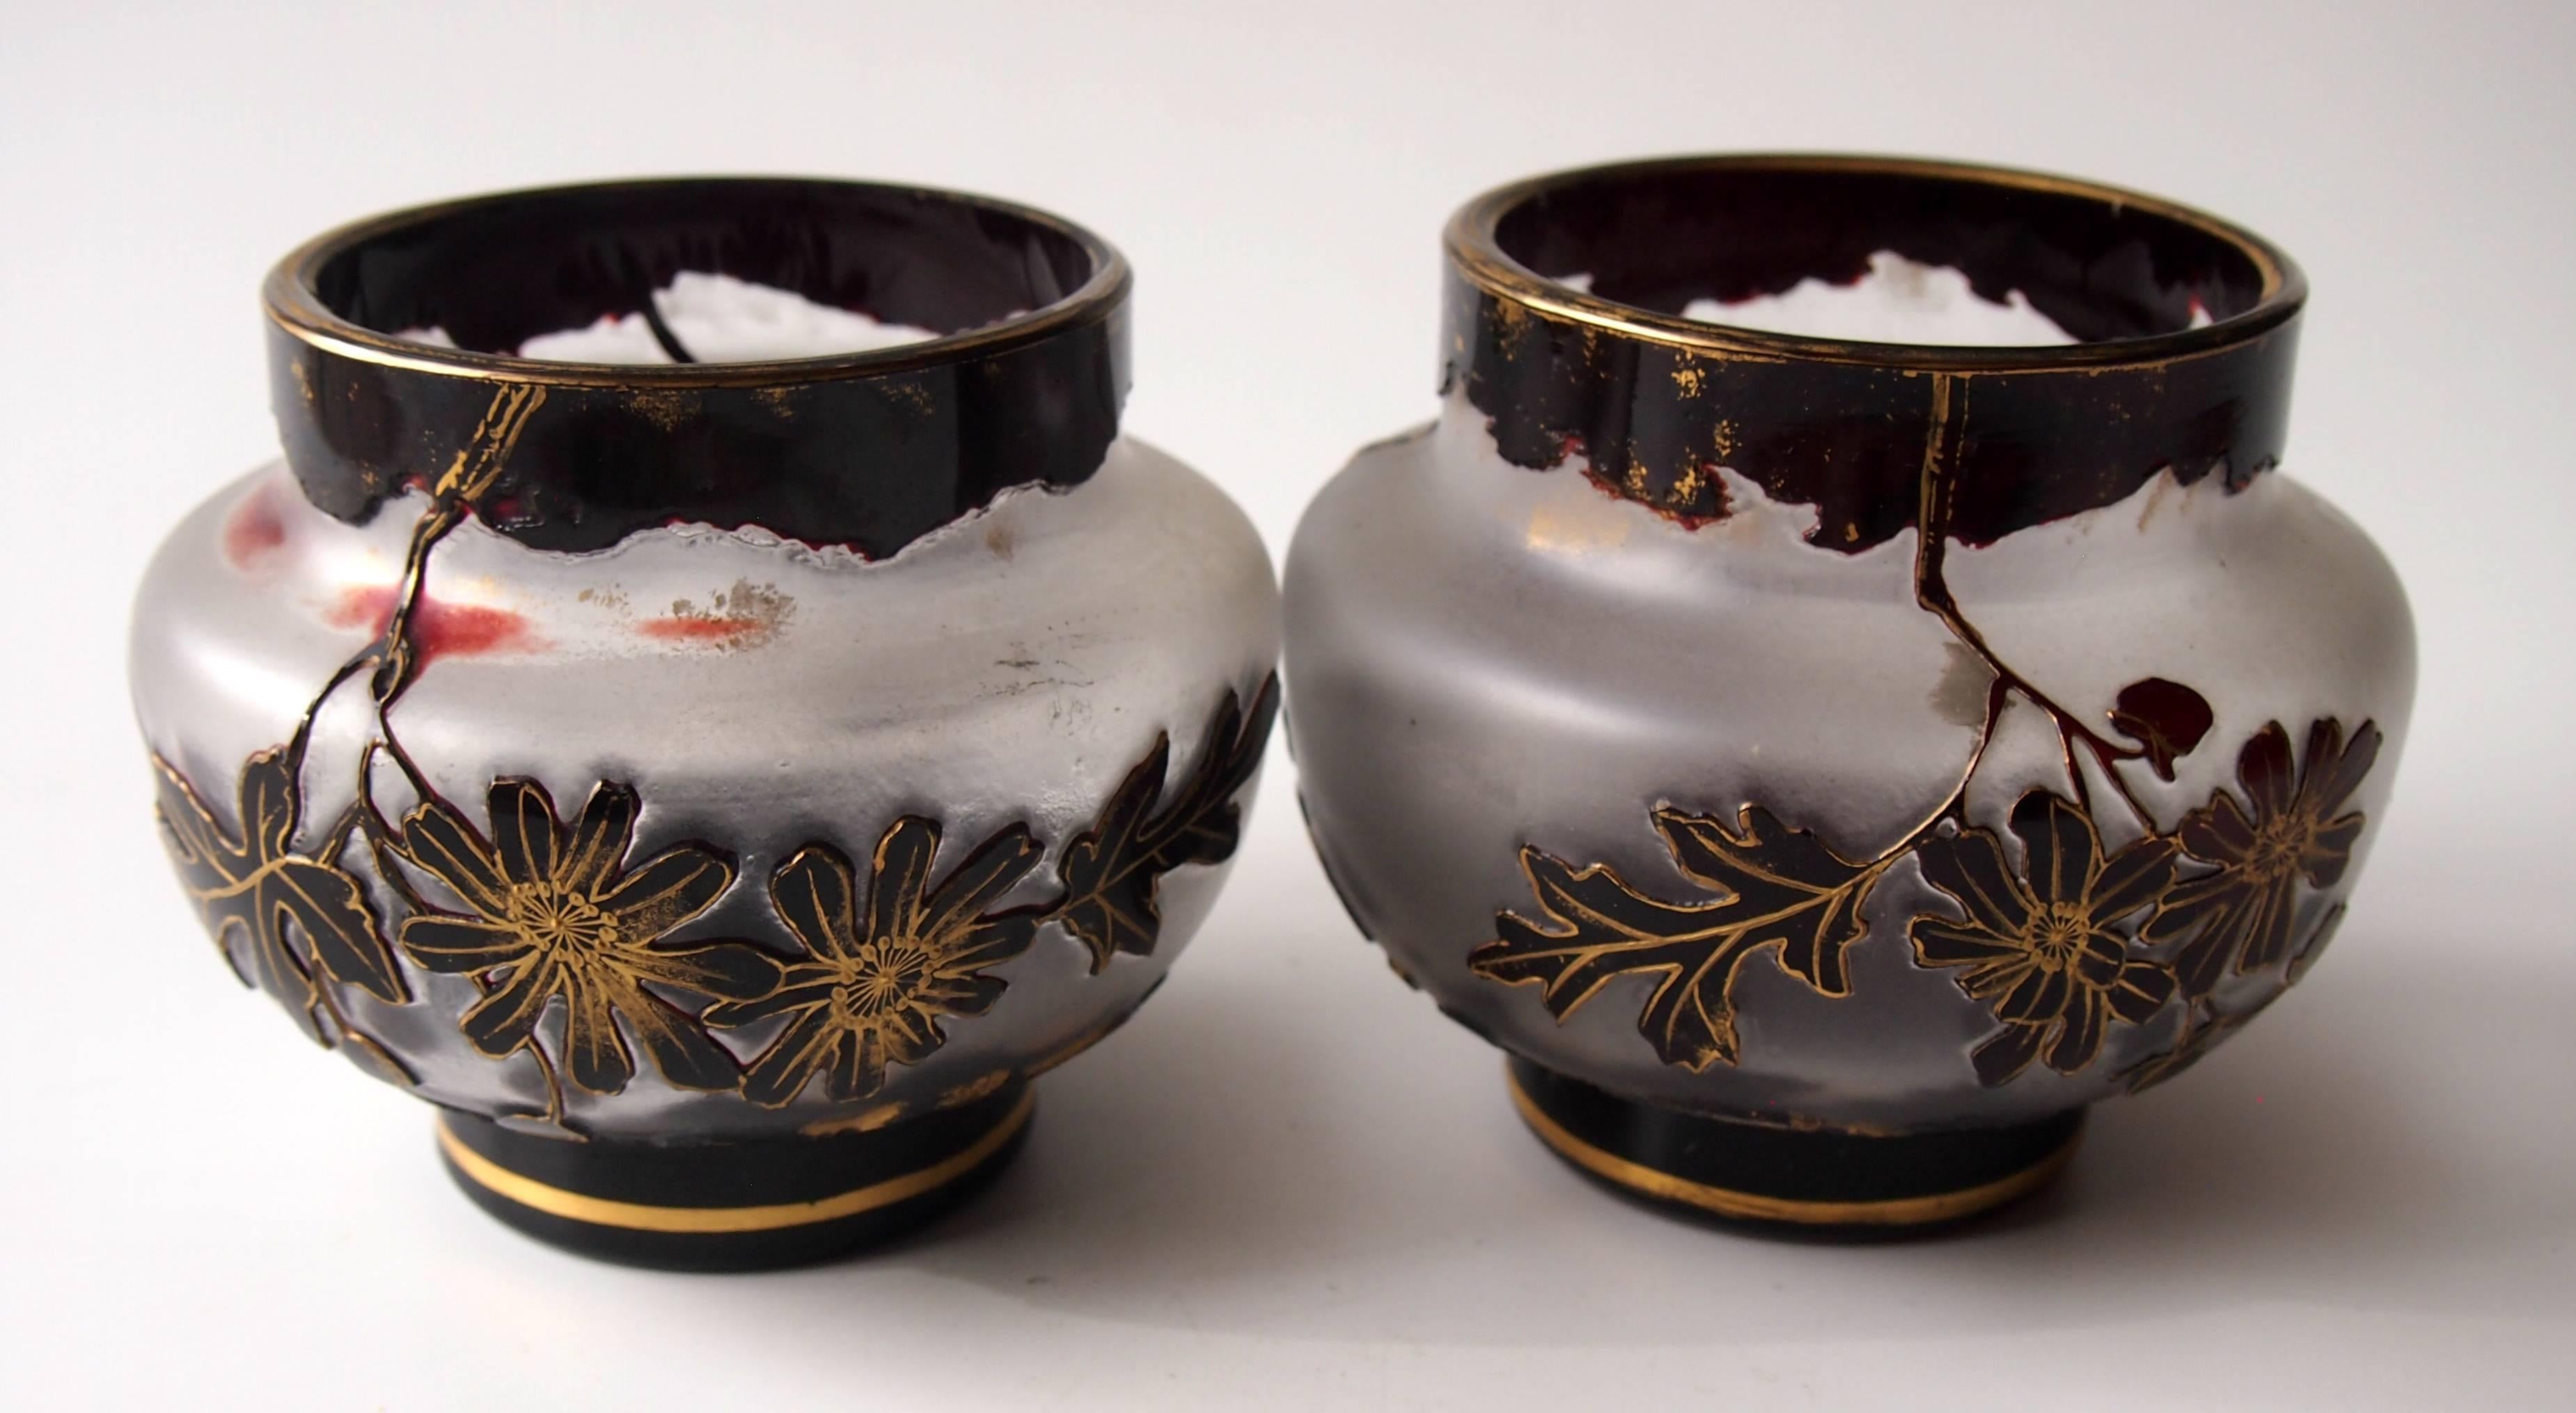 Super true pair of Harrach gilded dark red on clear cameo vases, depicting blooming branches. These are a very dramatic red -almost black over clear with thin red highlights. Bohemian cameos are sadly neglected and Harrach was one of the earliest